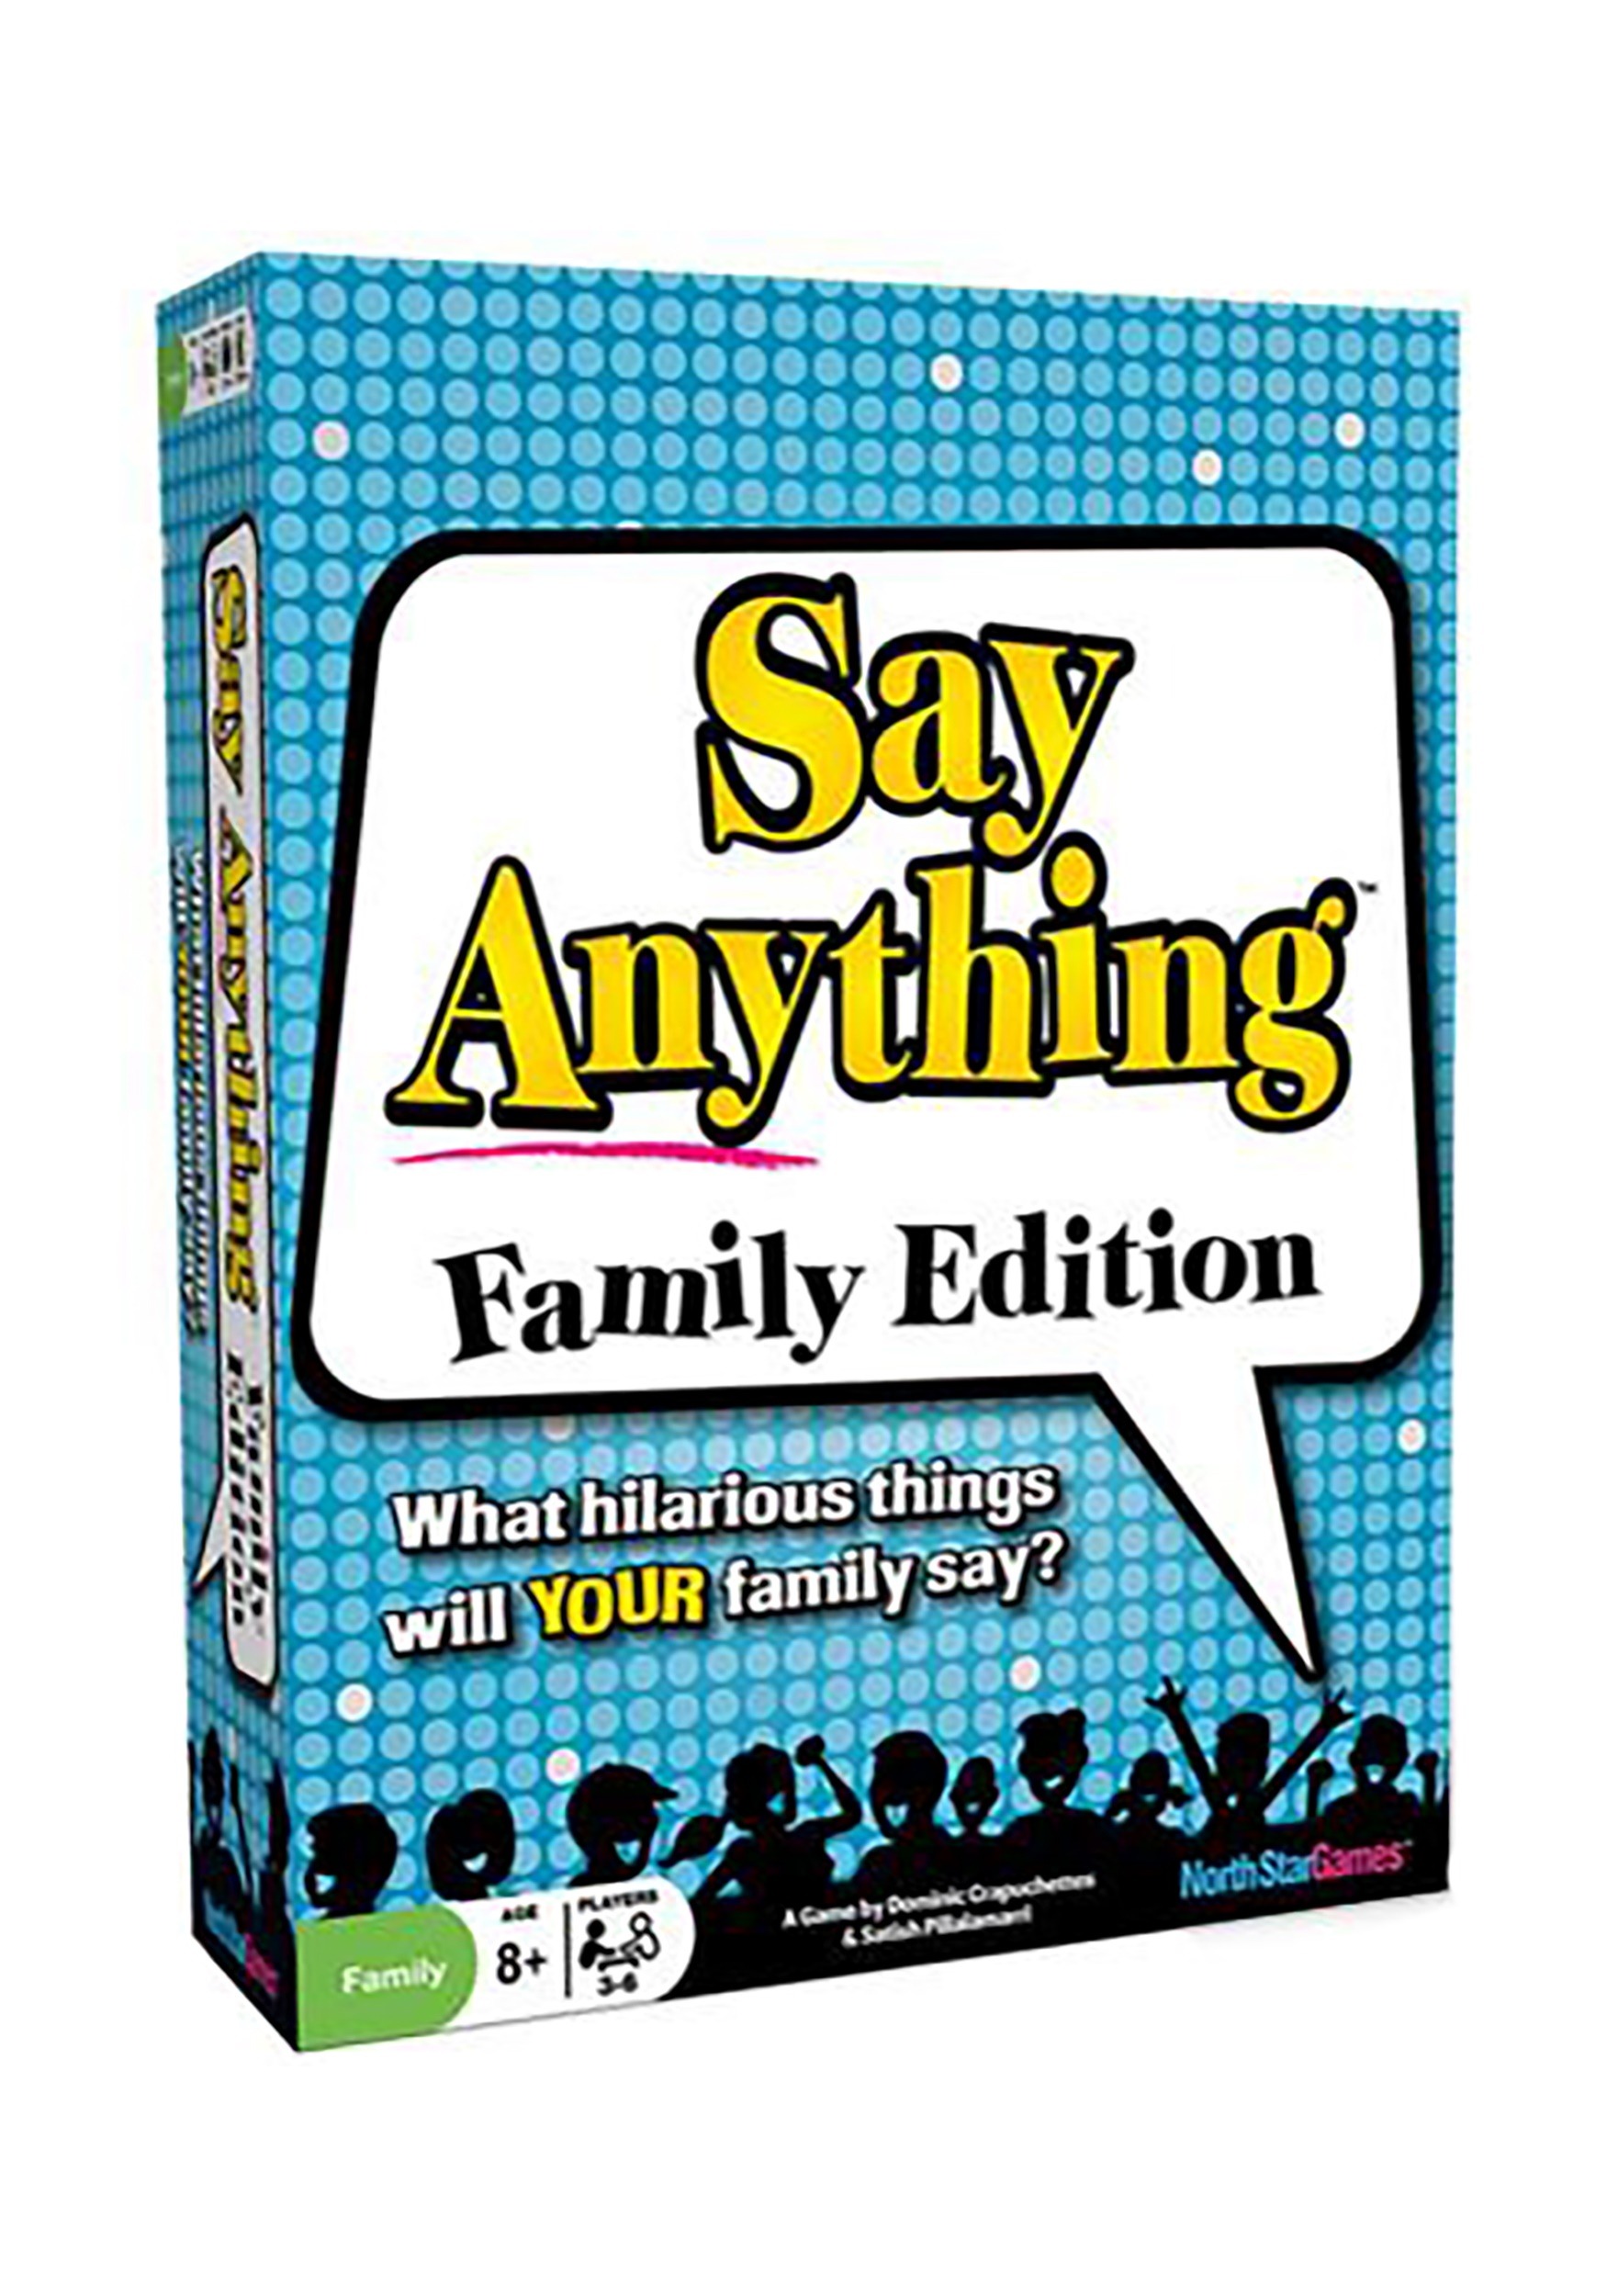 Say Anything Family Edition Party Game